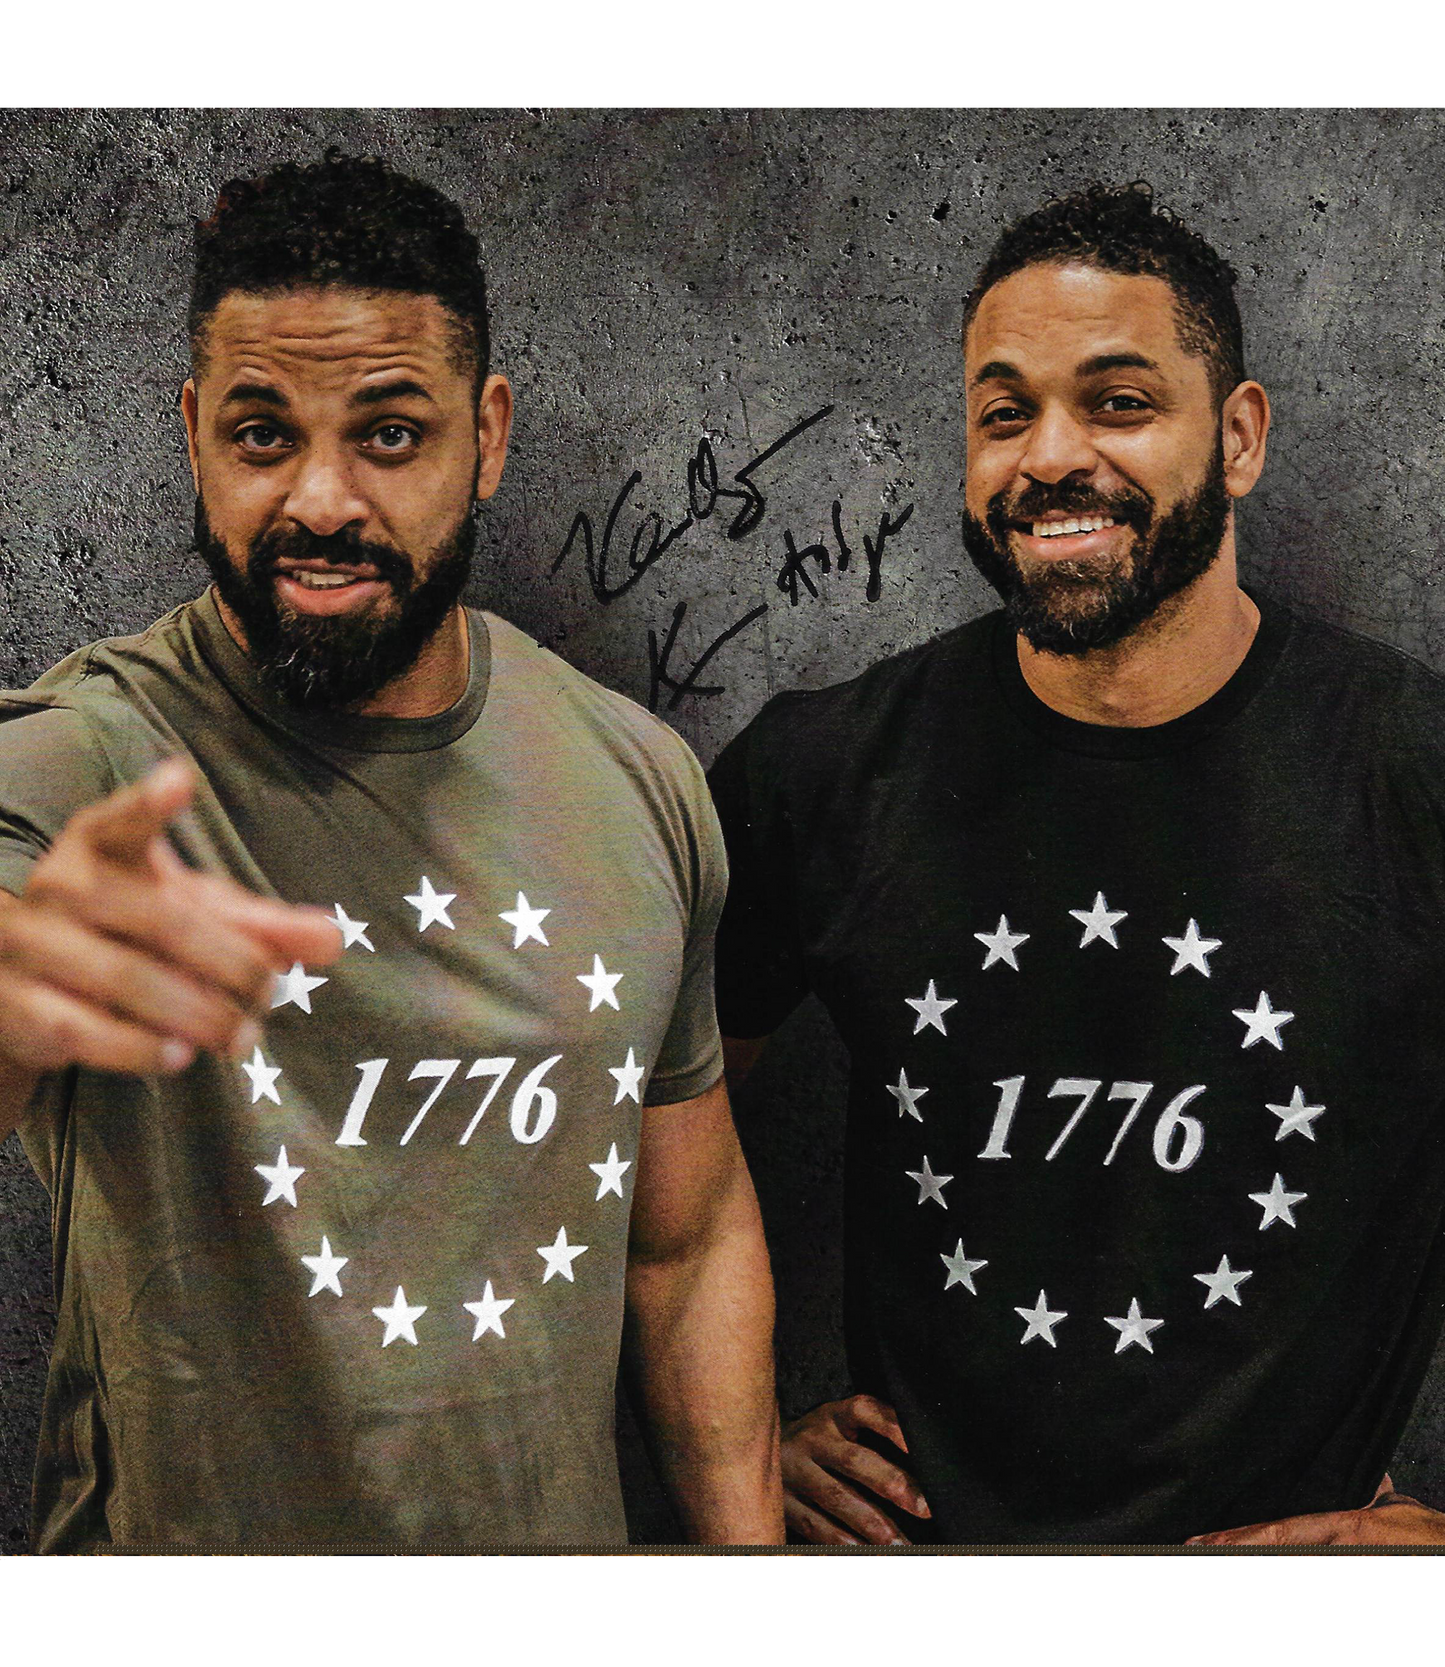 Limited Edition Signed Hodgetwins Photos